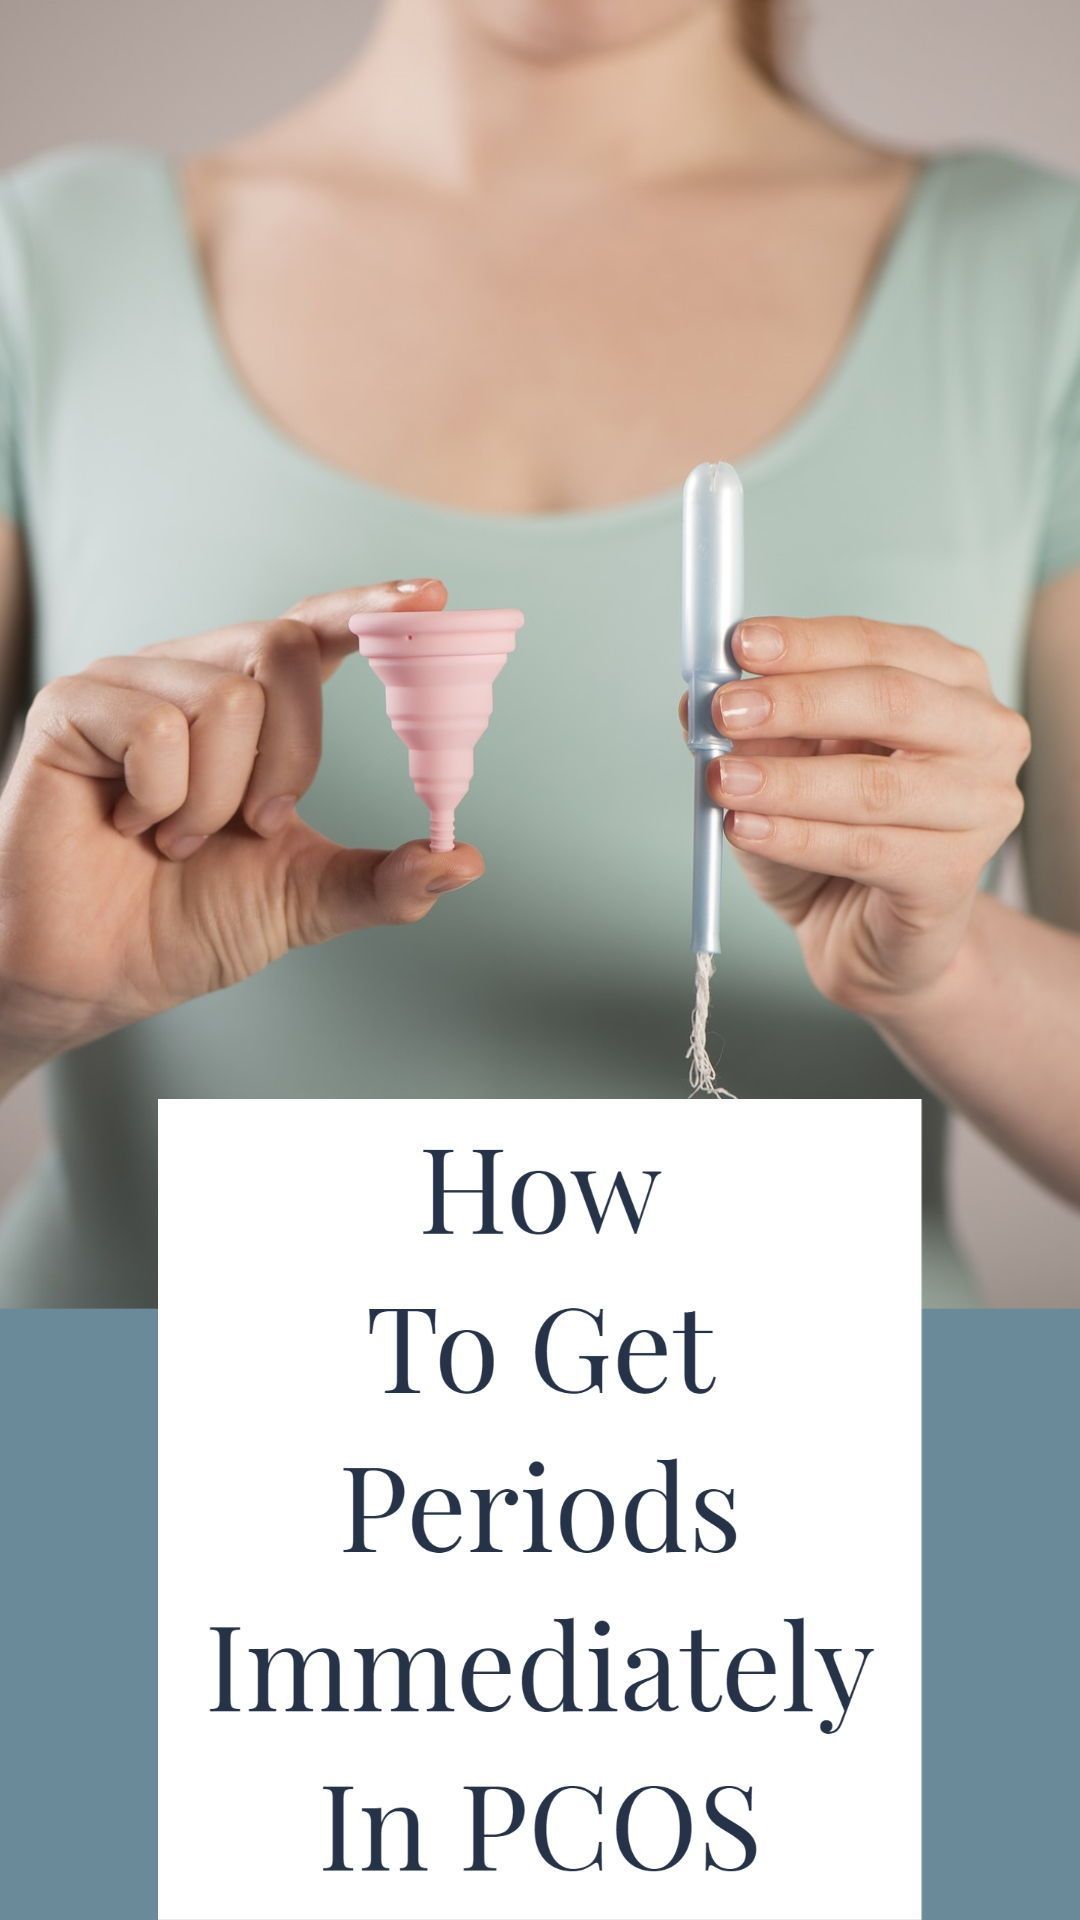 How To Get Periods Immediately In PCOS in 2021